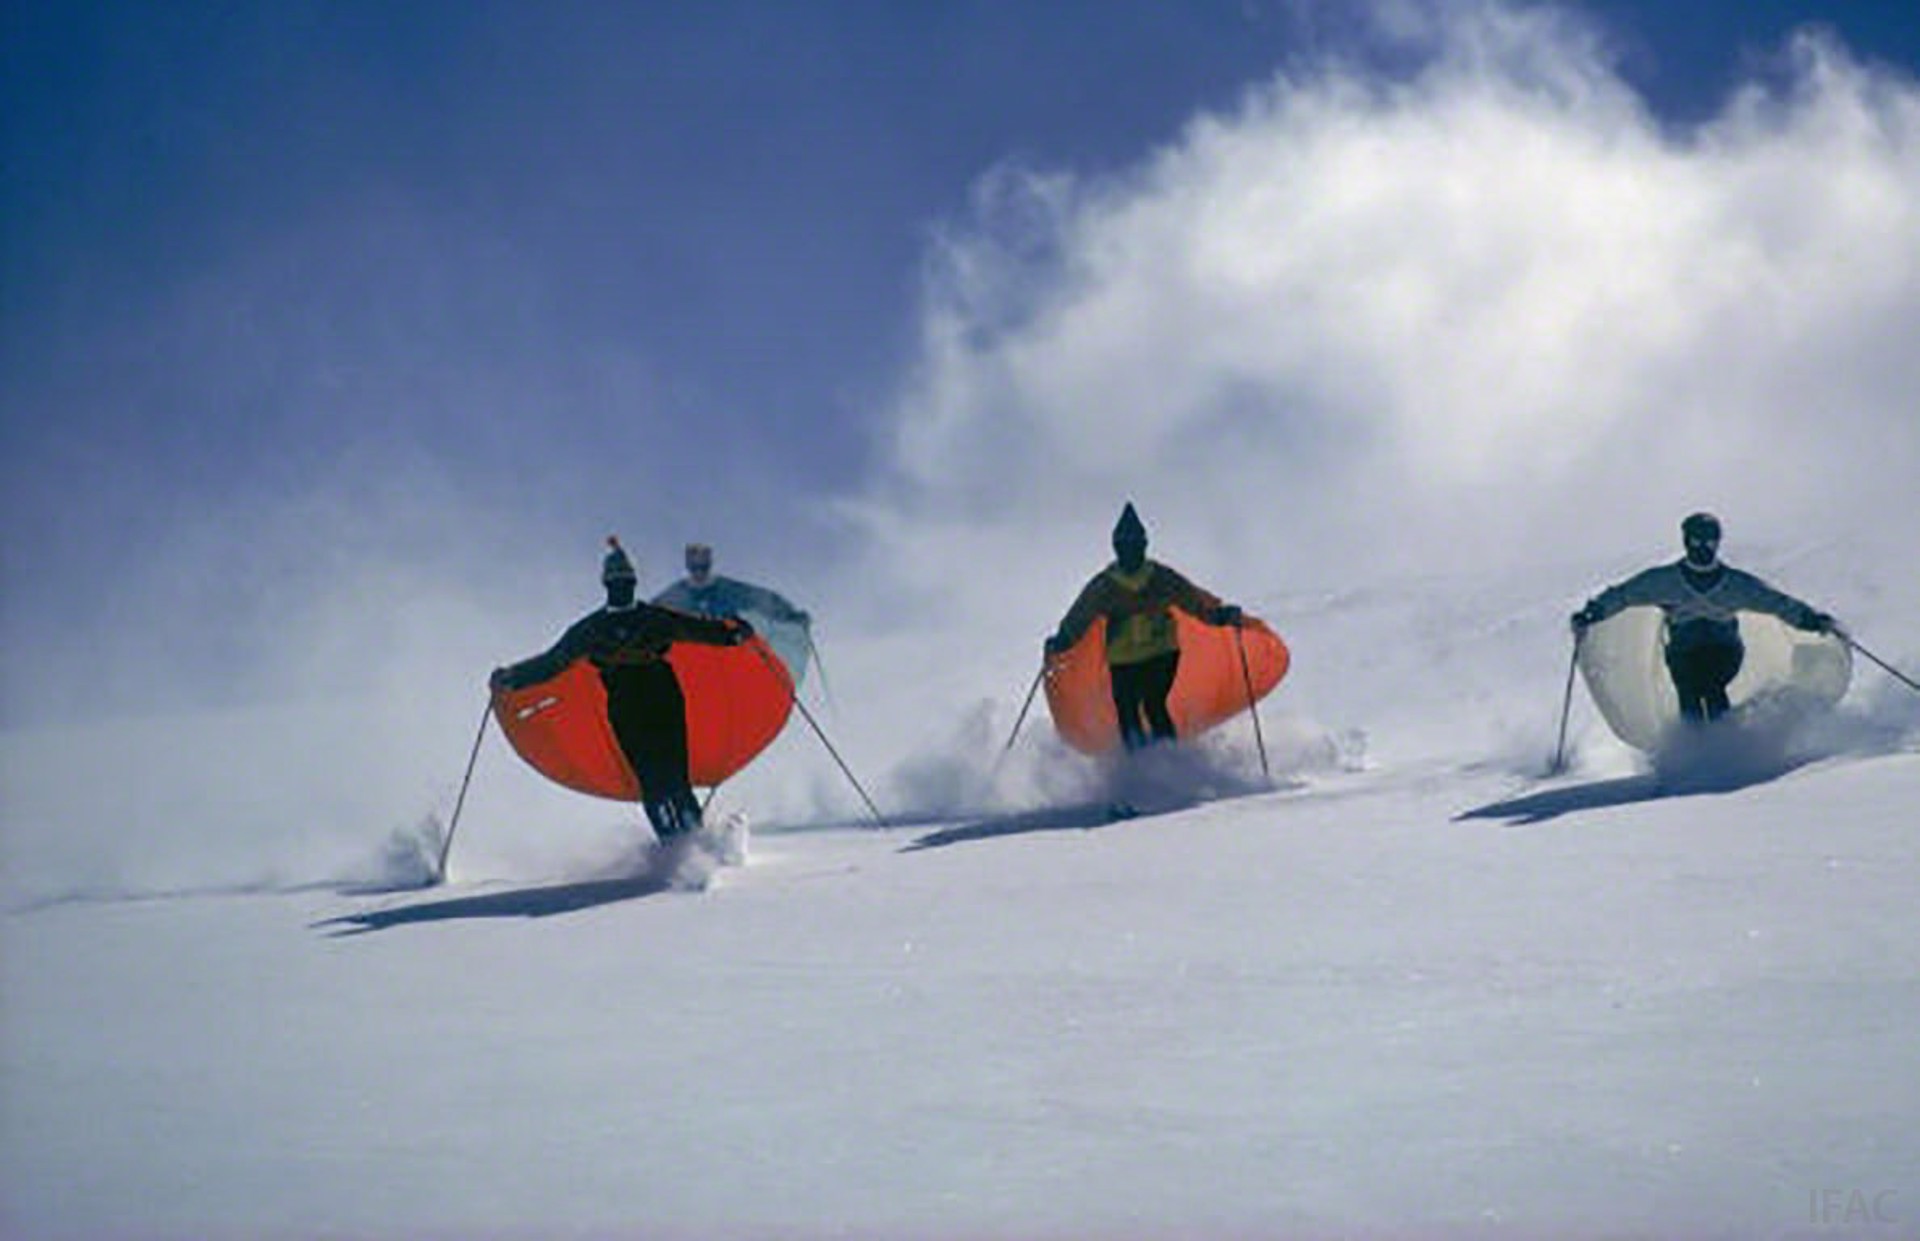 Caped Skiers (Aarons Estate Edition) by Slim Aarons